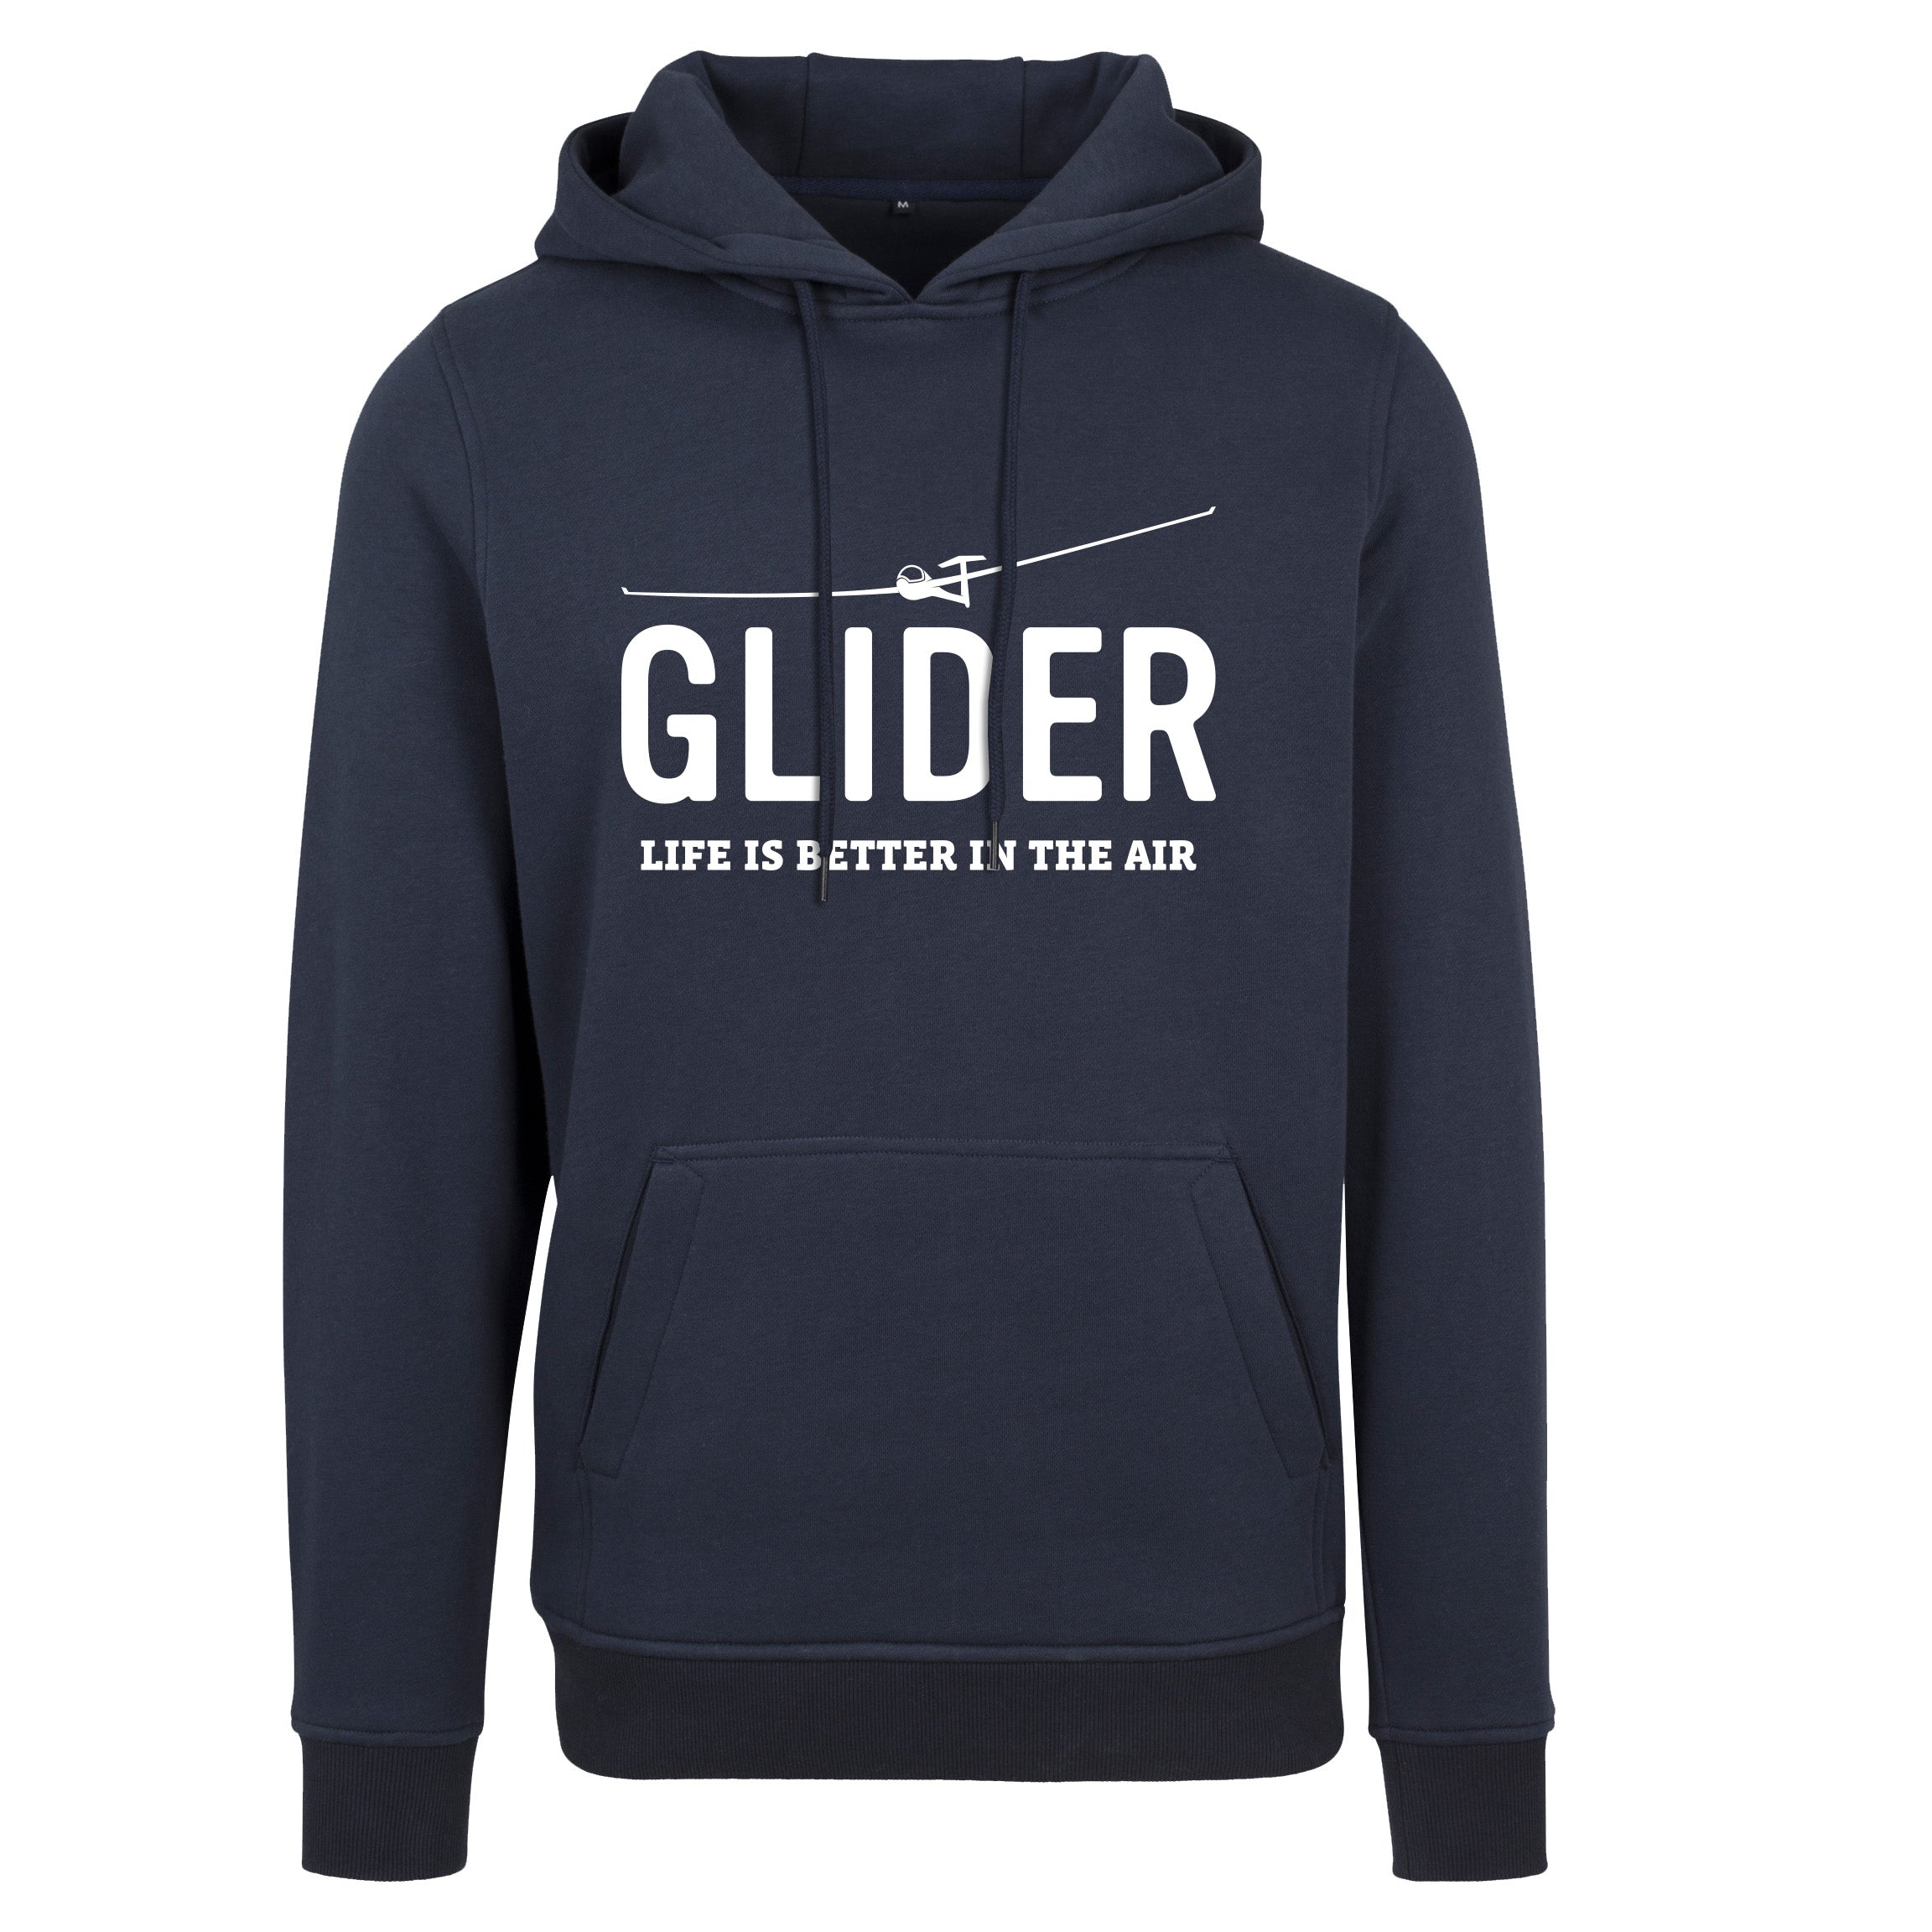 Glider Life is better in the air Hoodie